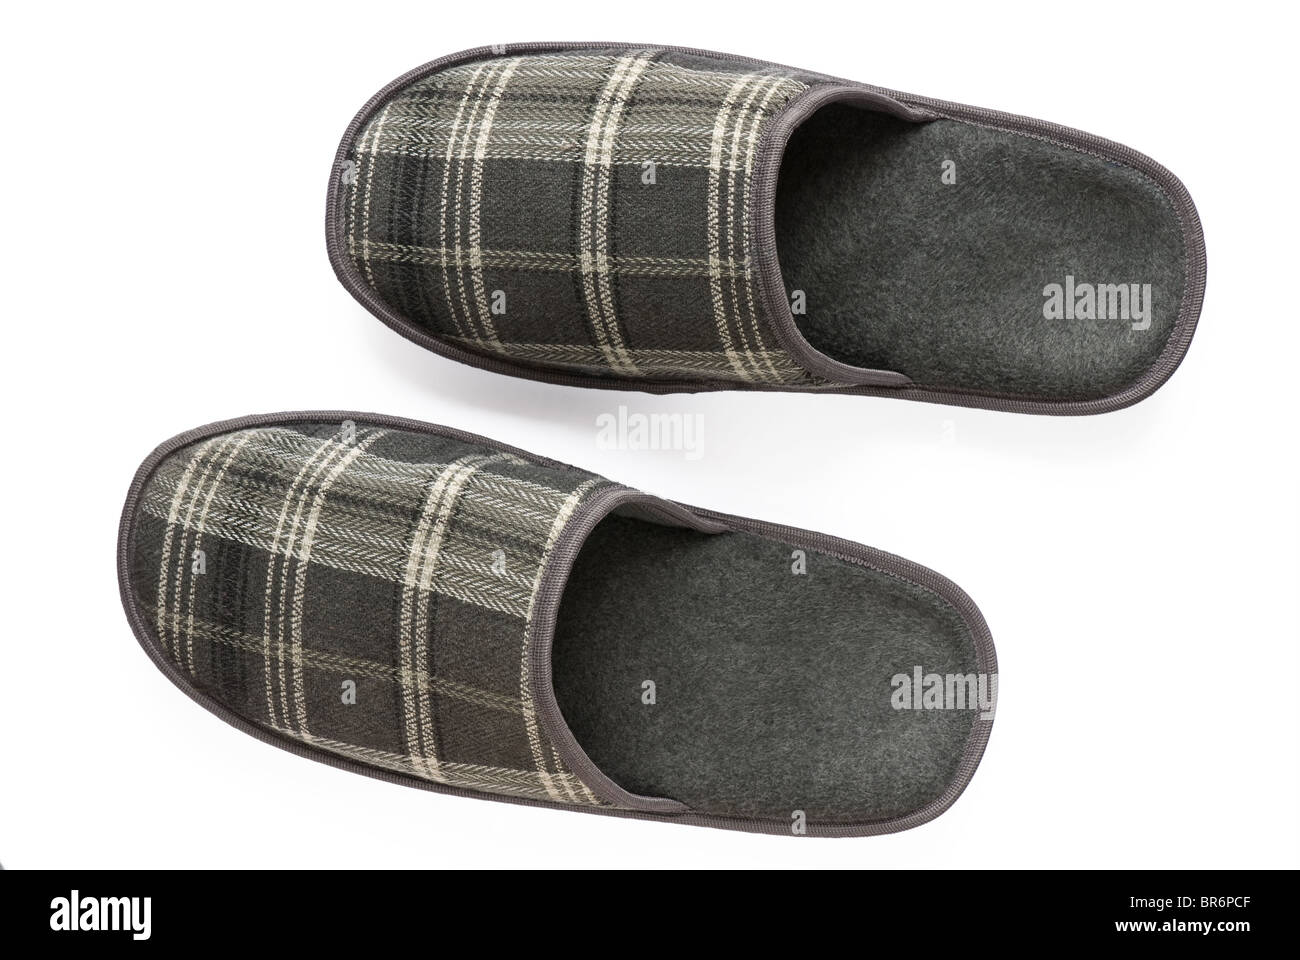 Slippers isolated Stock Photo